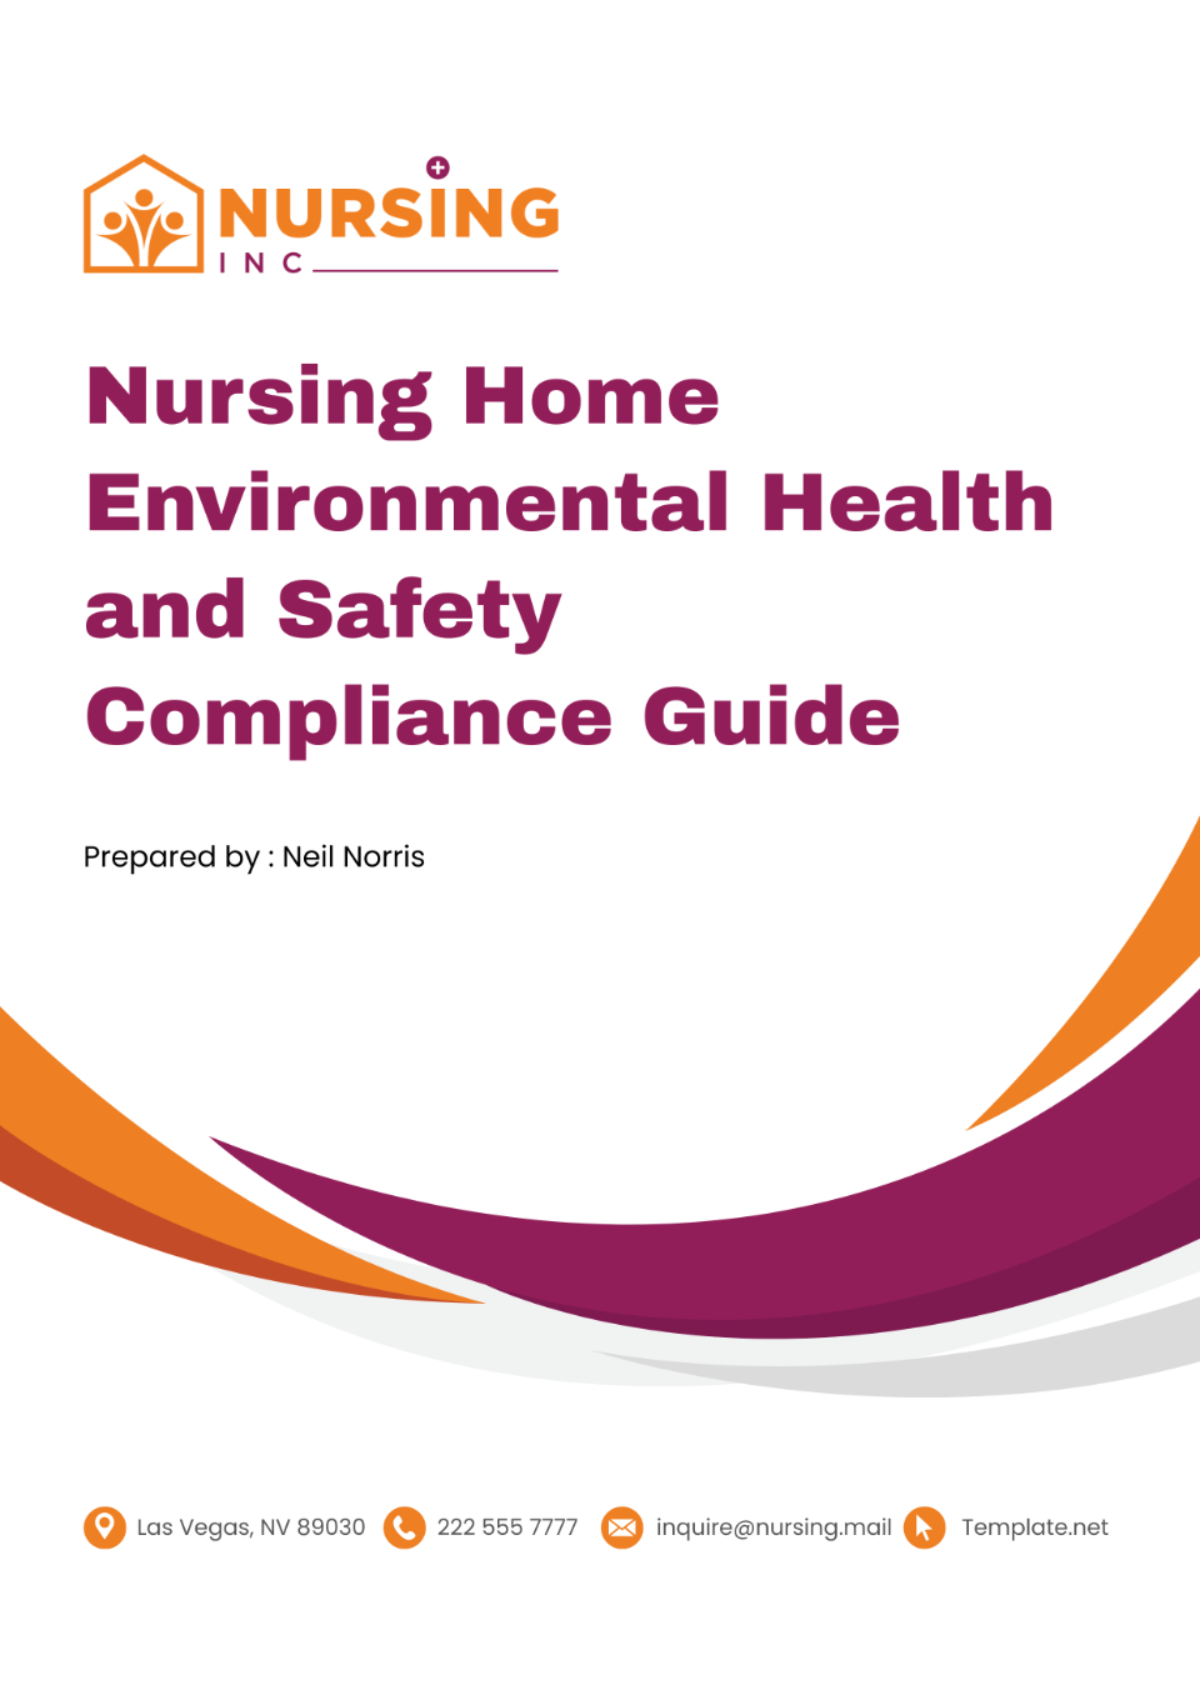 Nursing Home Environmental Health and Safety Compliance Guide Template